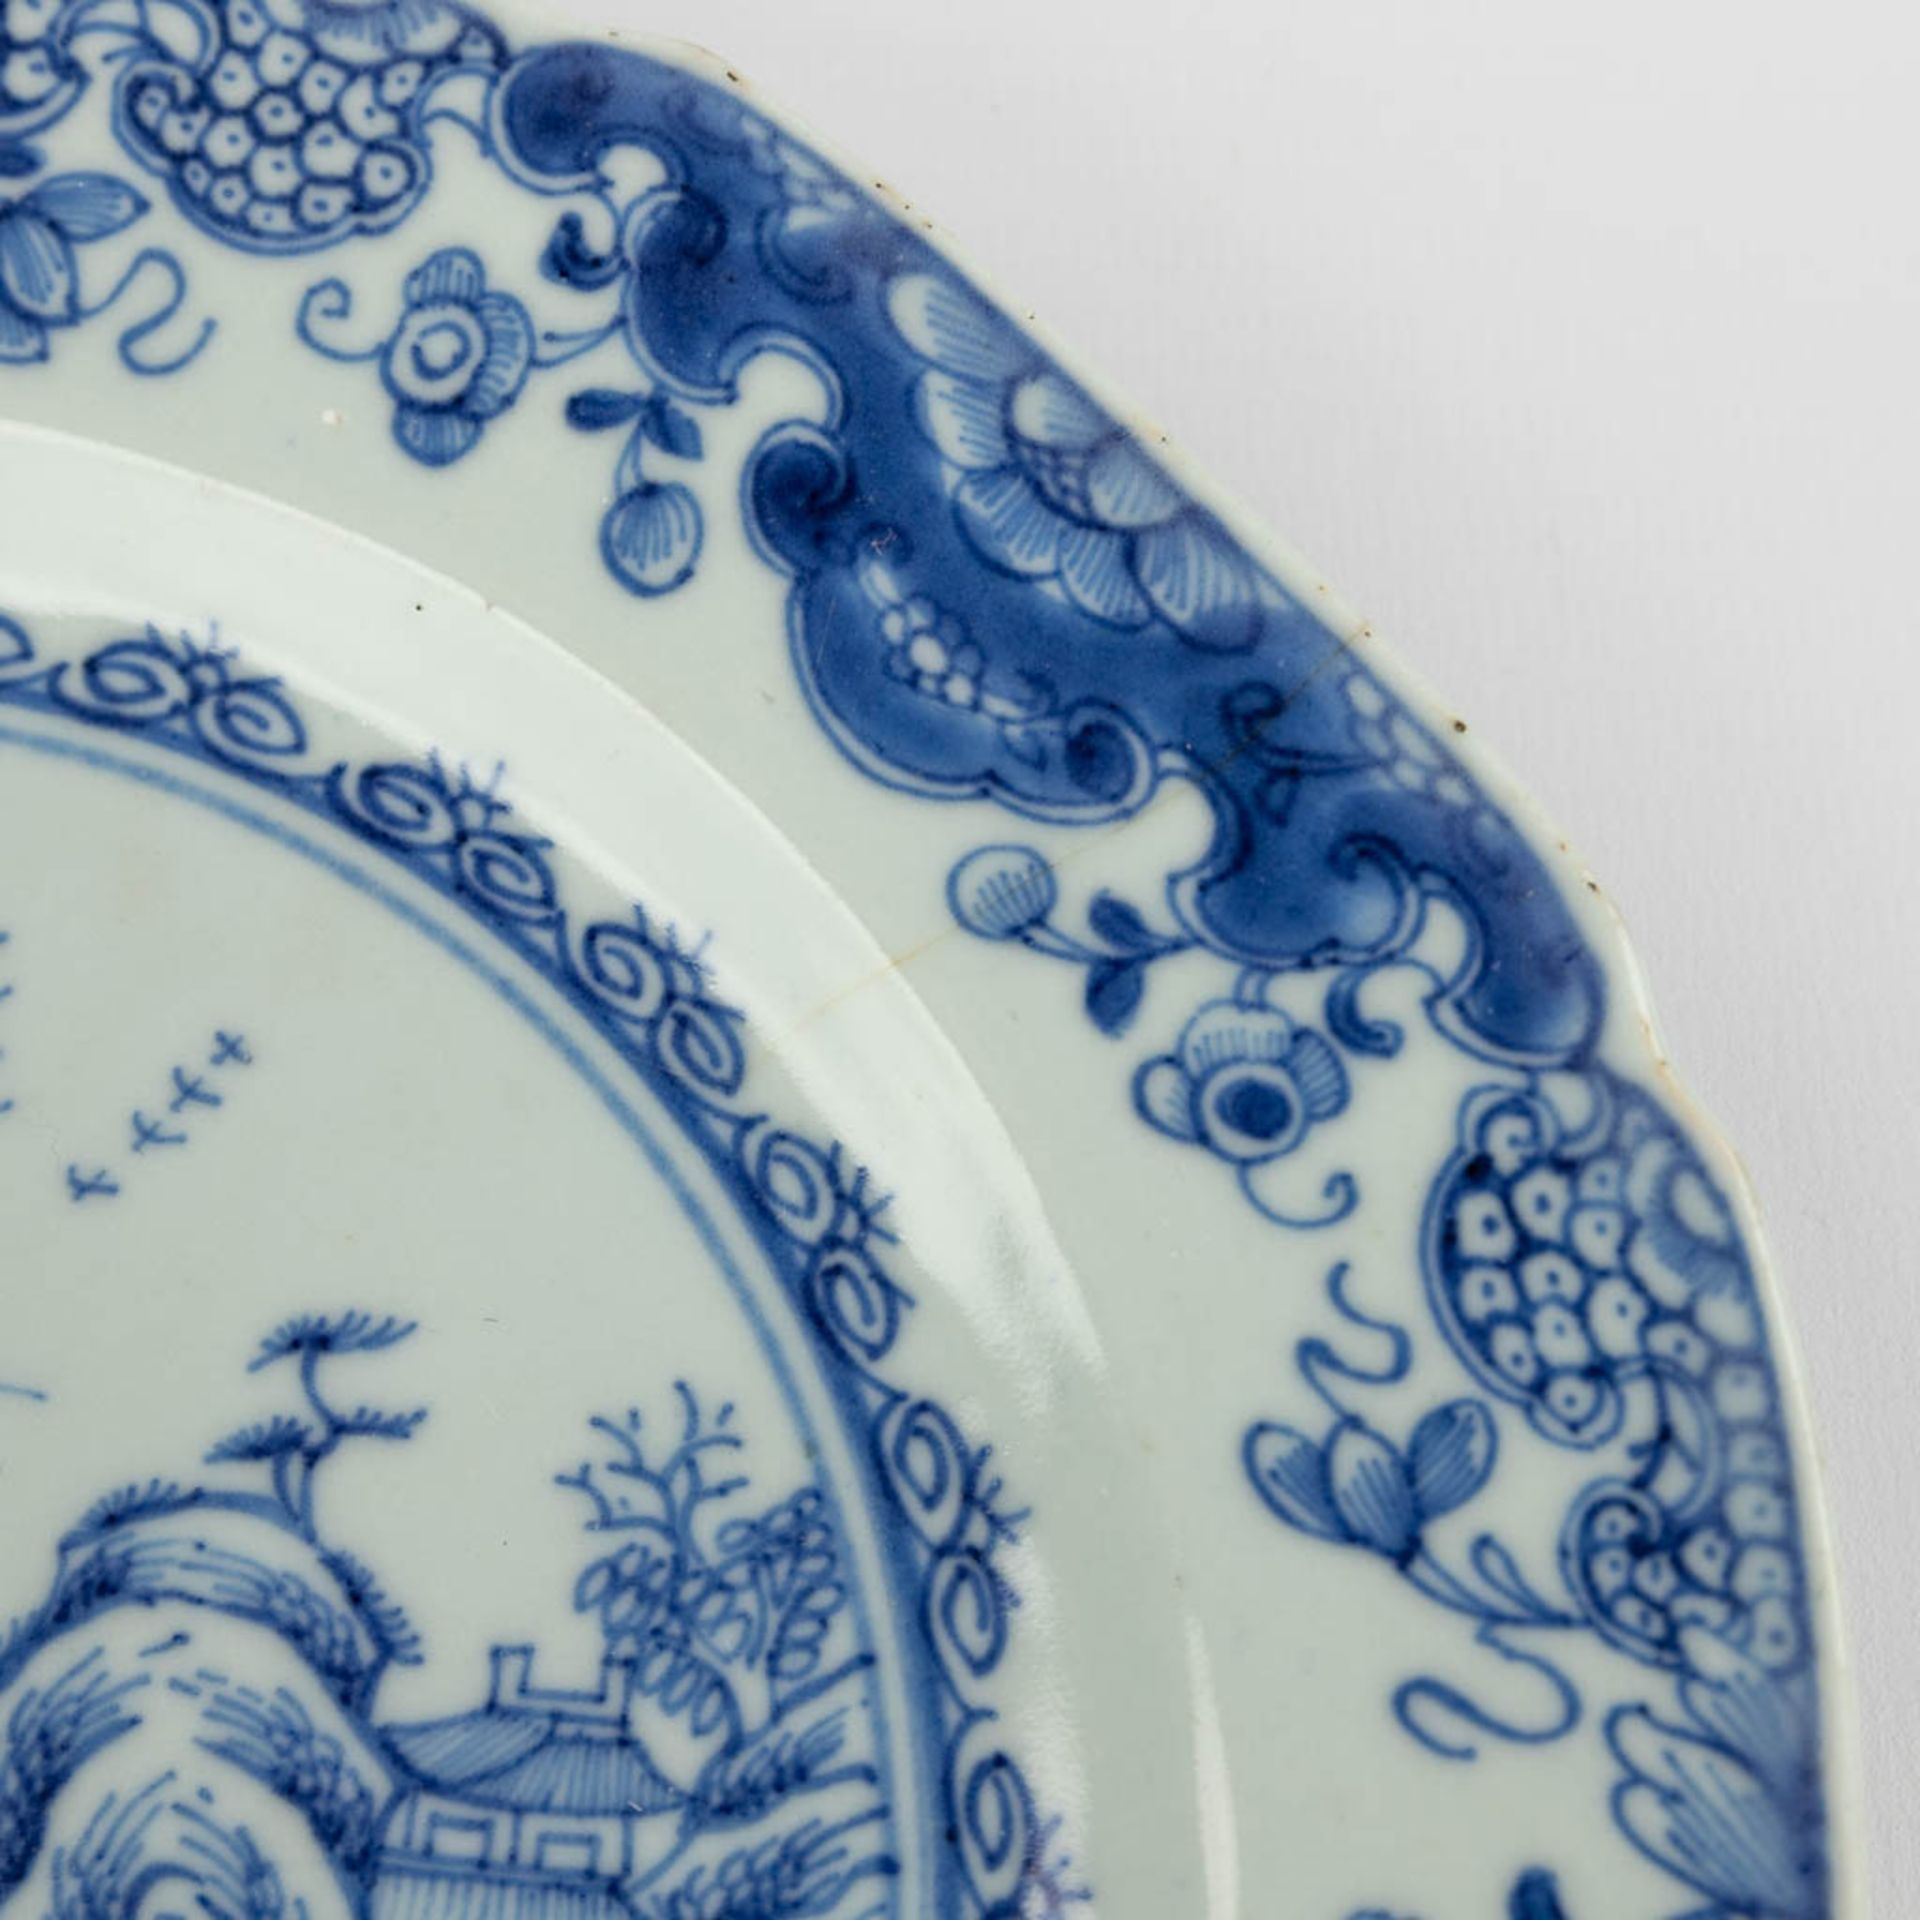 A collection of 7 Chinese plates and platters made of blue-white porcelain. (34 x 40,5 cm) - Image 14 of 23